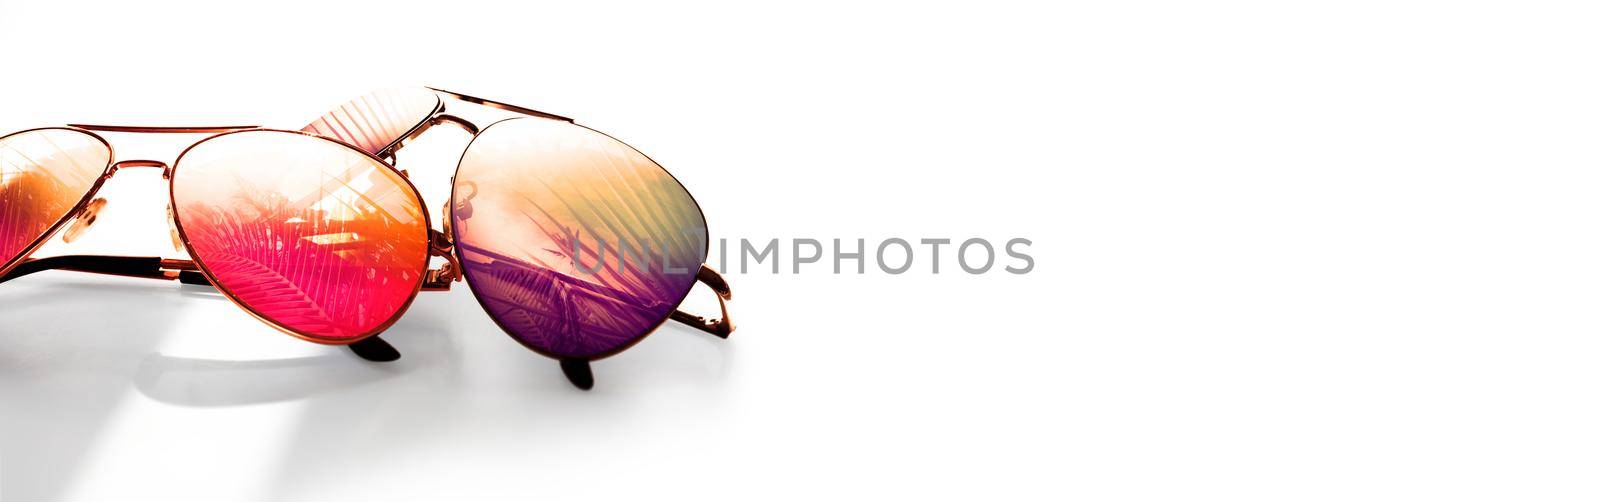 Summer tropical beach background with fashionable sunglasses. by Taut